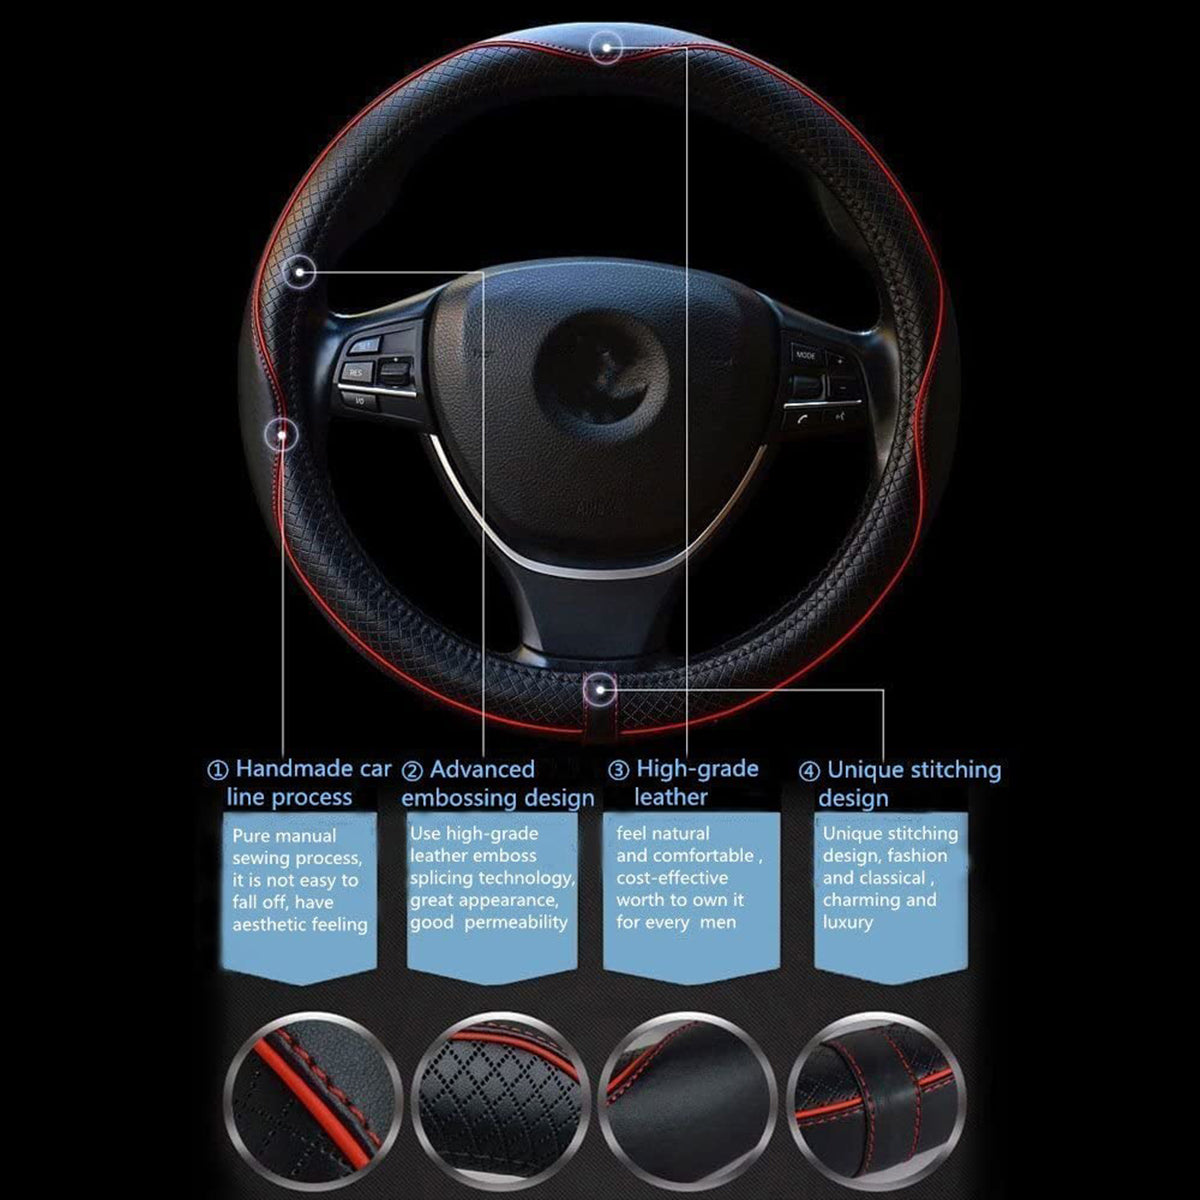 Car Steering Wheel Cover, Custom For Your Cars, Anti-Slip, Safety, Soft, Breathable, Heavy Duty, Thick, Full Surround, Sports Style, Car Accessories KX18990 - Delicate Leather